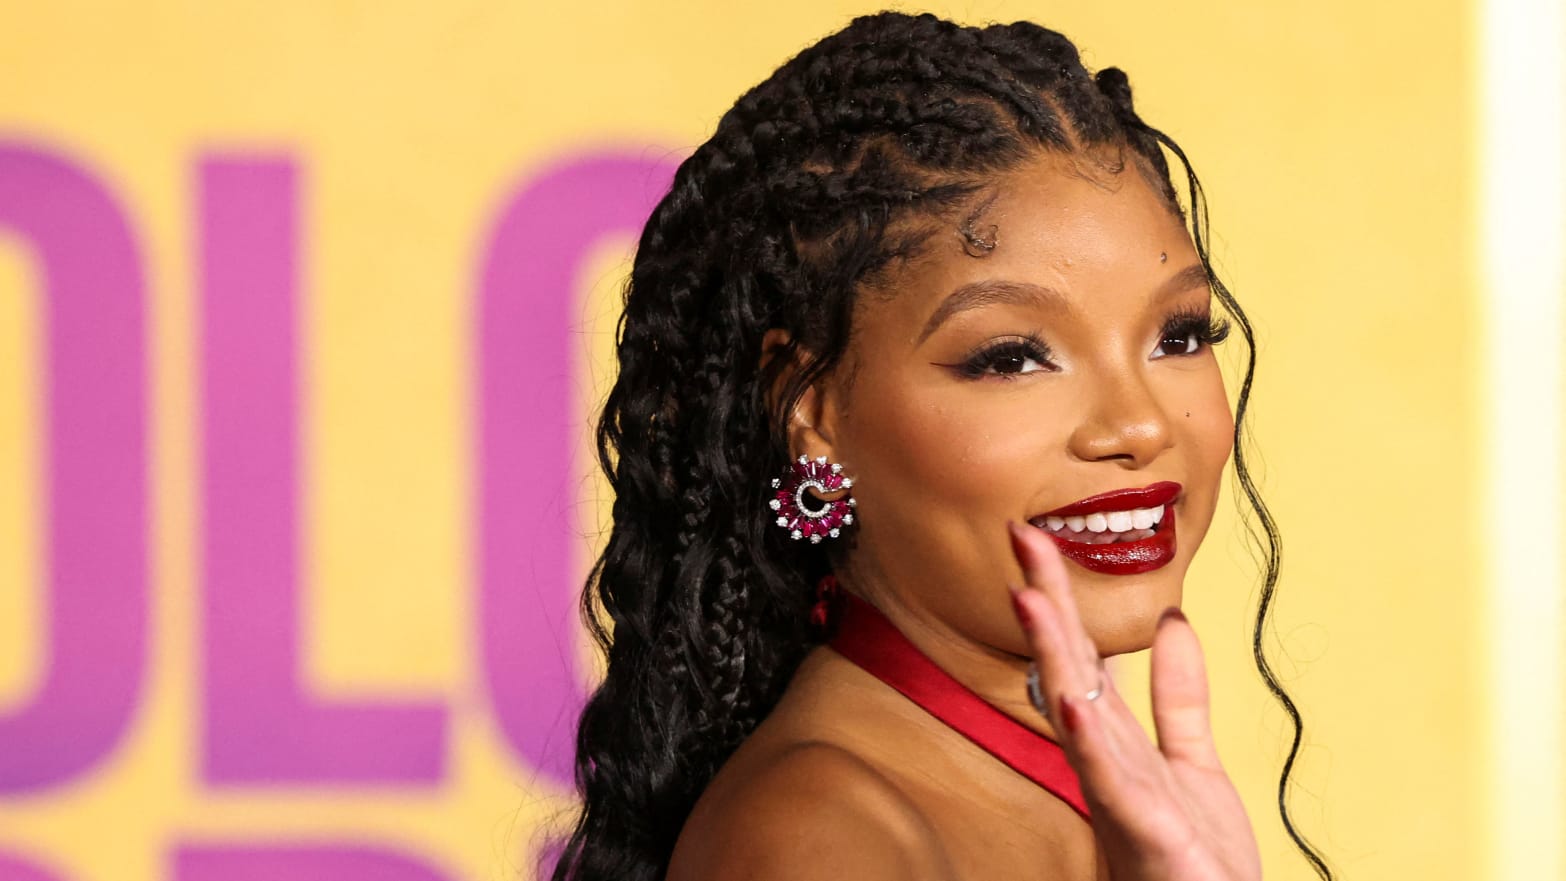 Cast member Halle Bailey attends a premiere for the film \"The Color Purple\" in Los Angeles, California